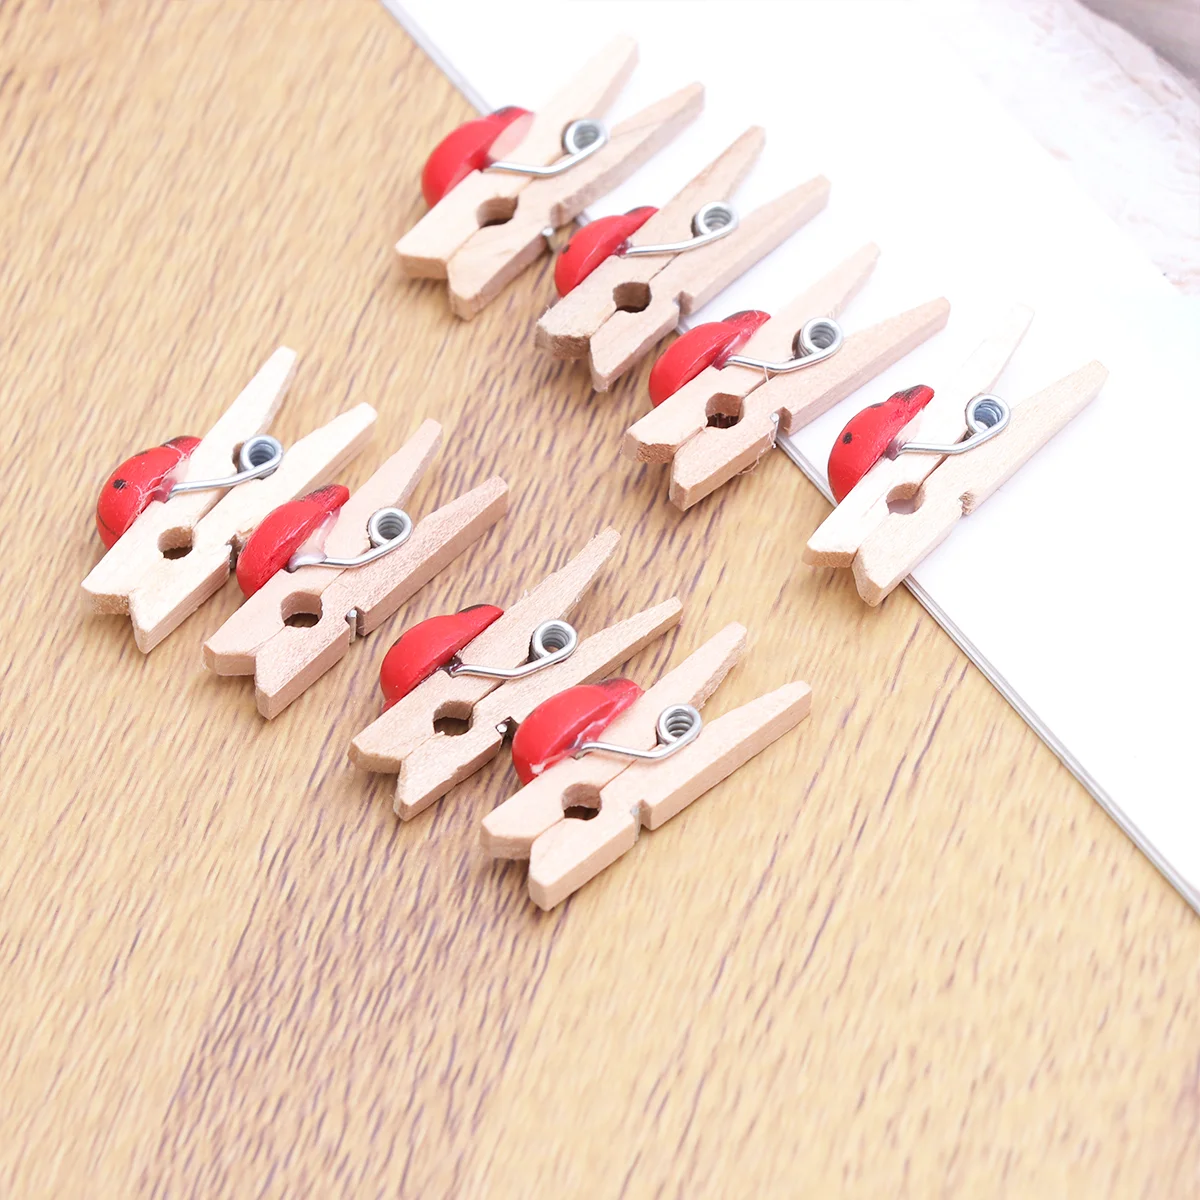 

100Pcs Wooden Photo Clips, Red Beetle Shape Photo Hanging Display Pegs Set Photo Decor Clips Craft Decorative Clips for Wedding